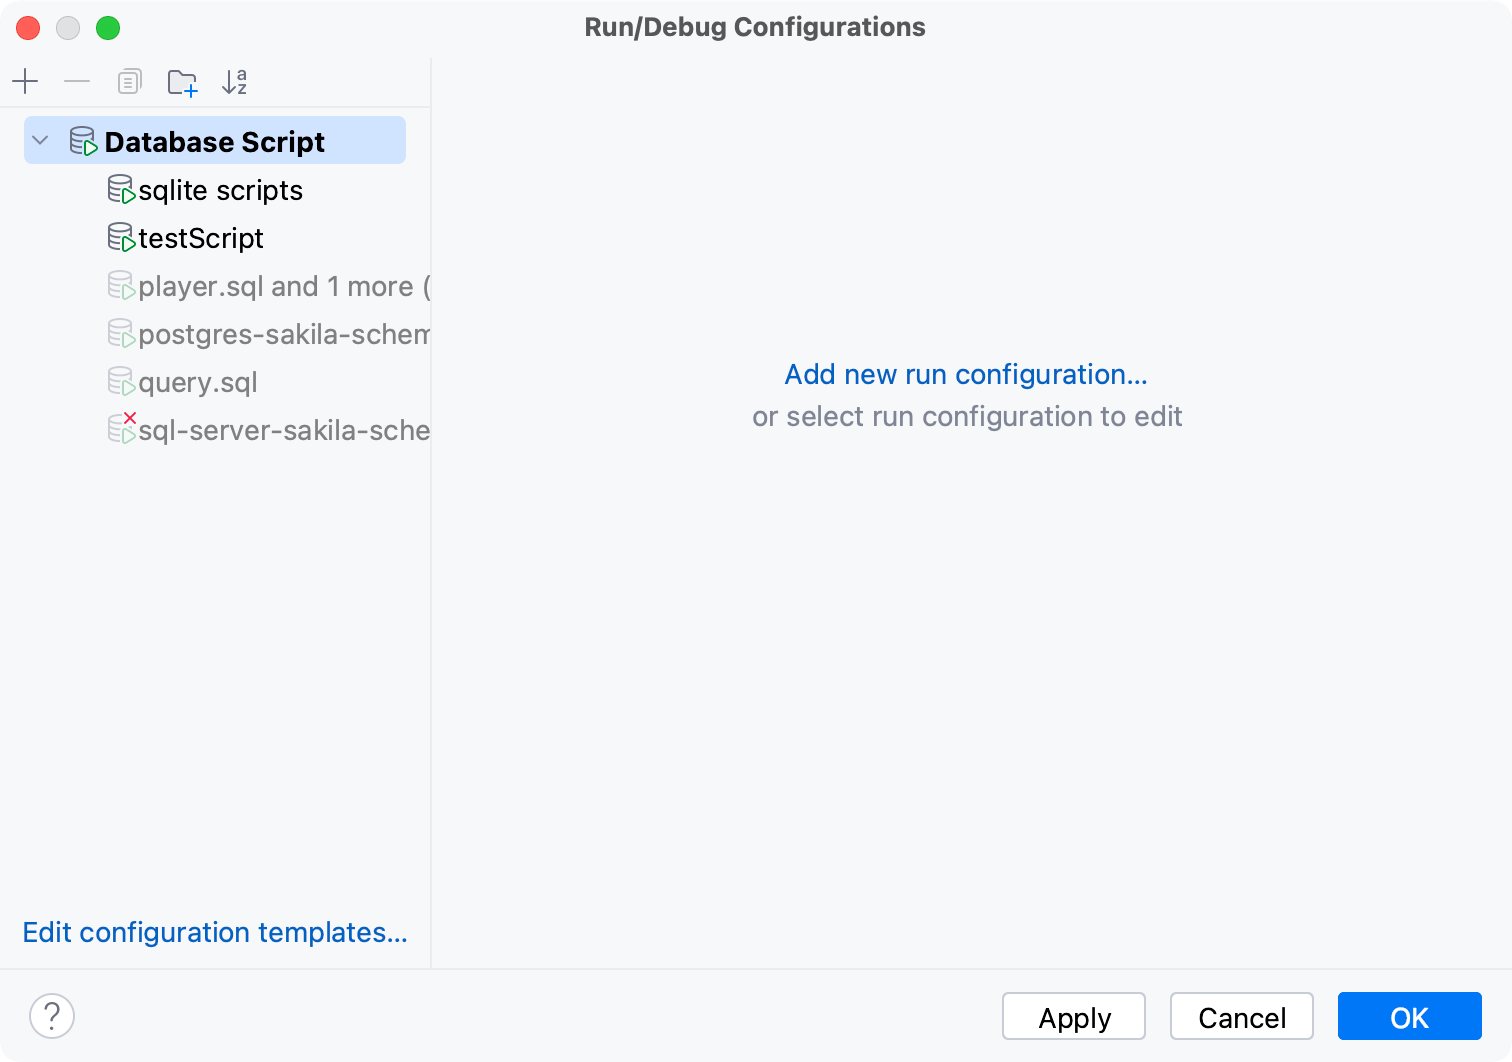 Permanent and temporary configurations have different icons